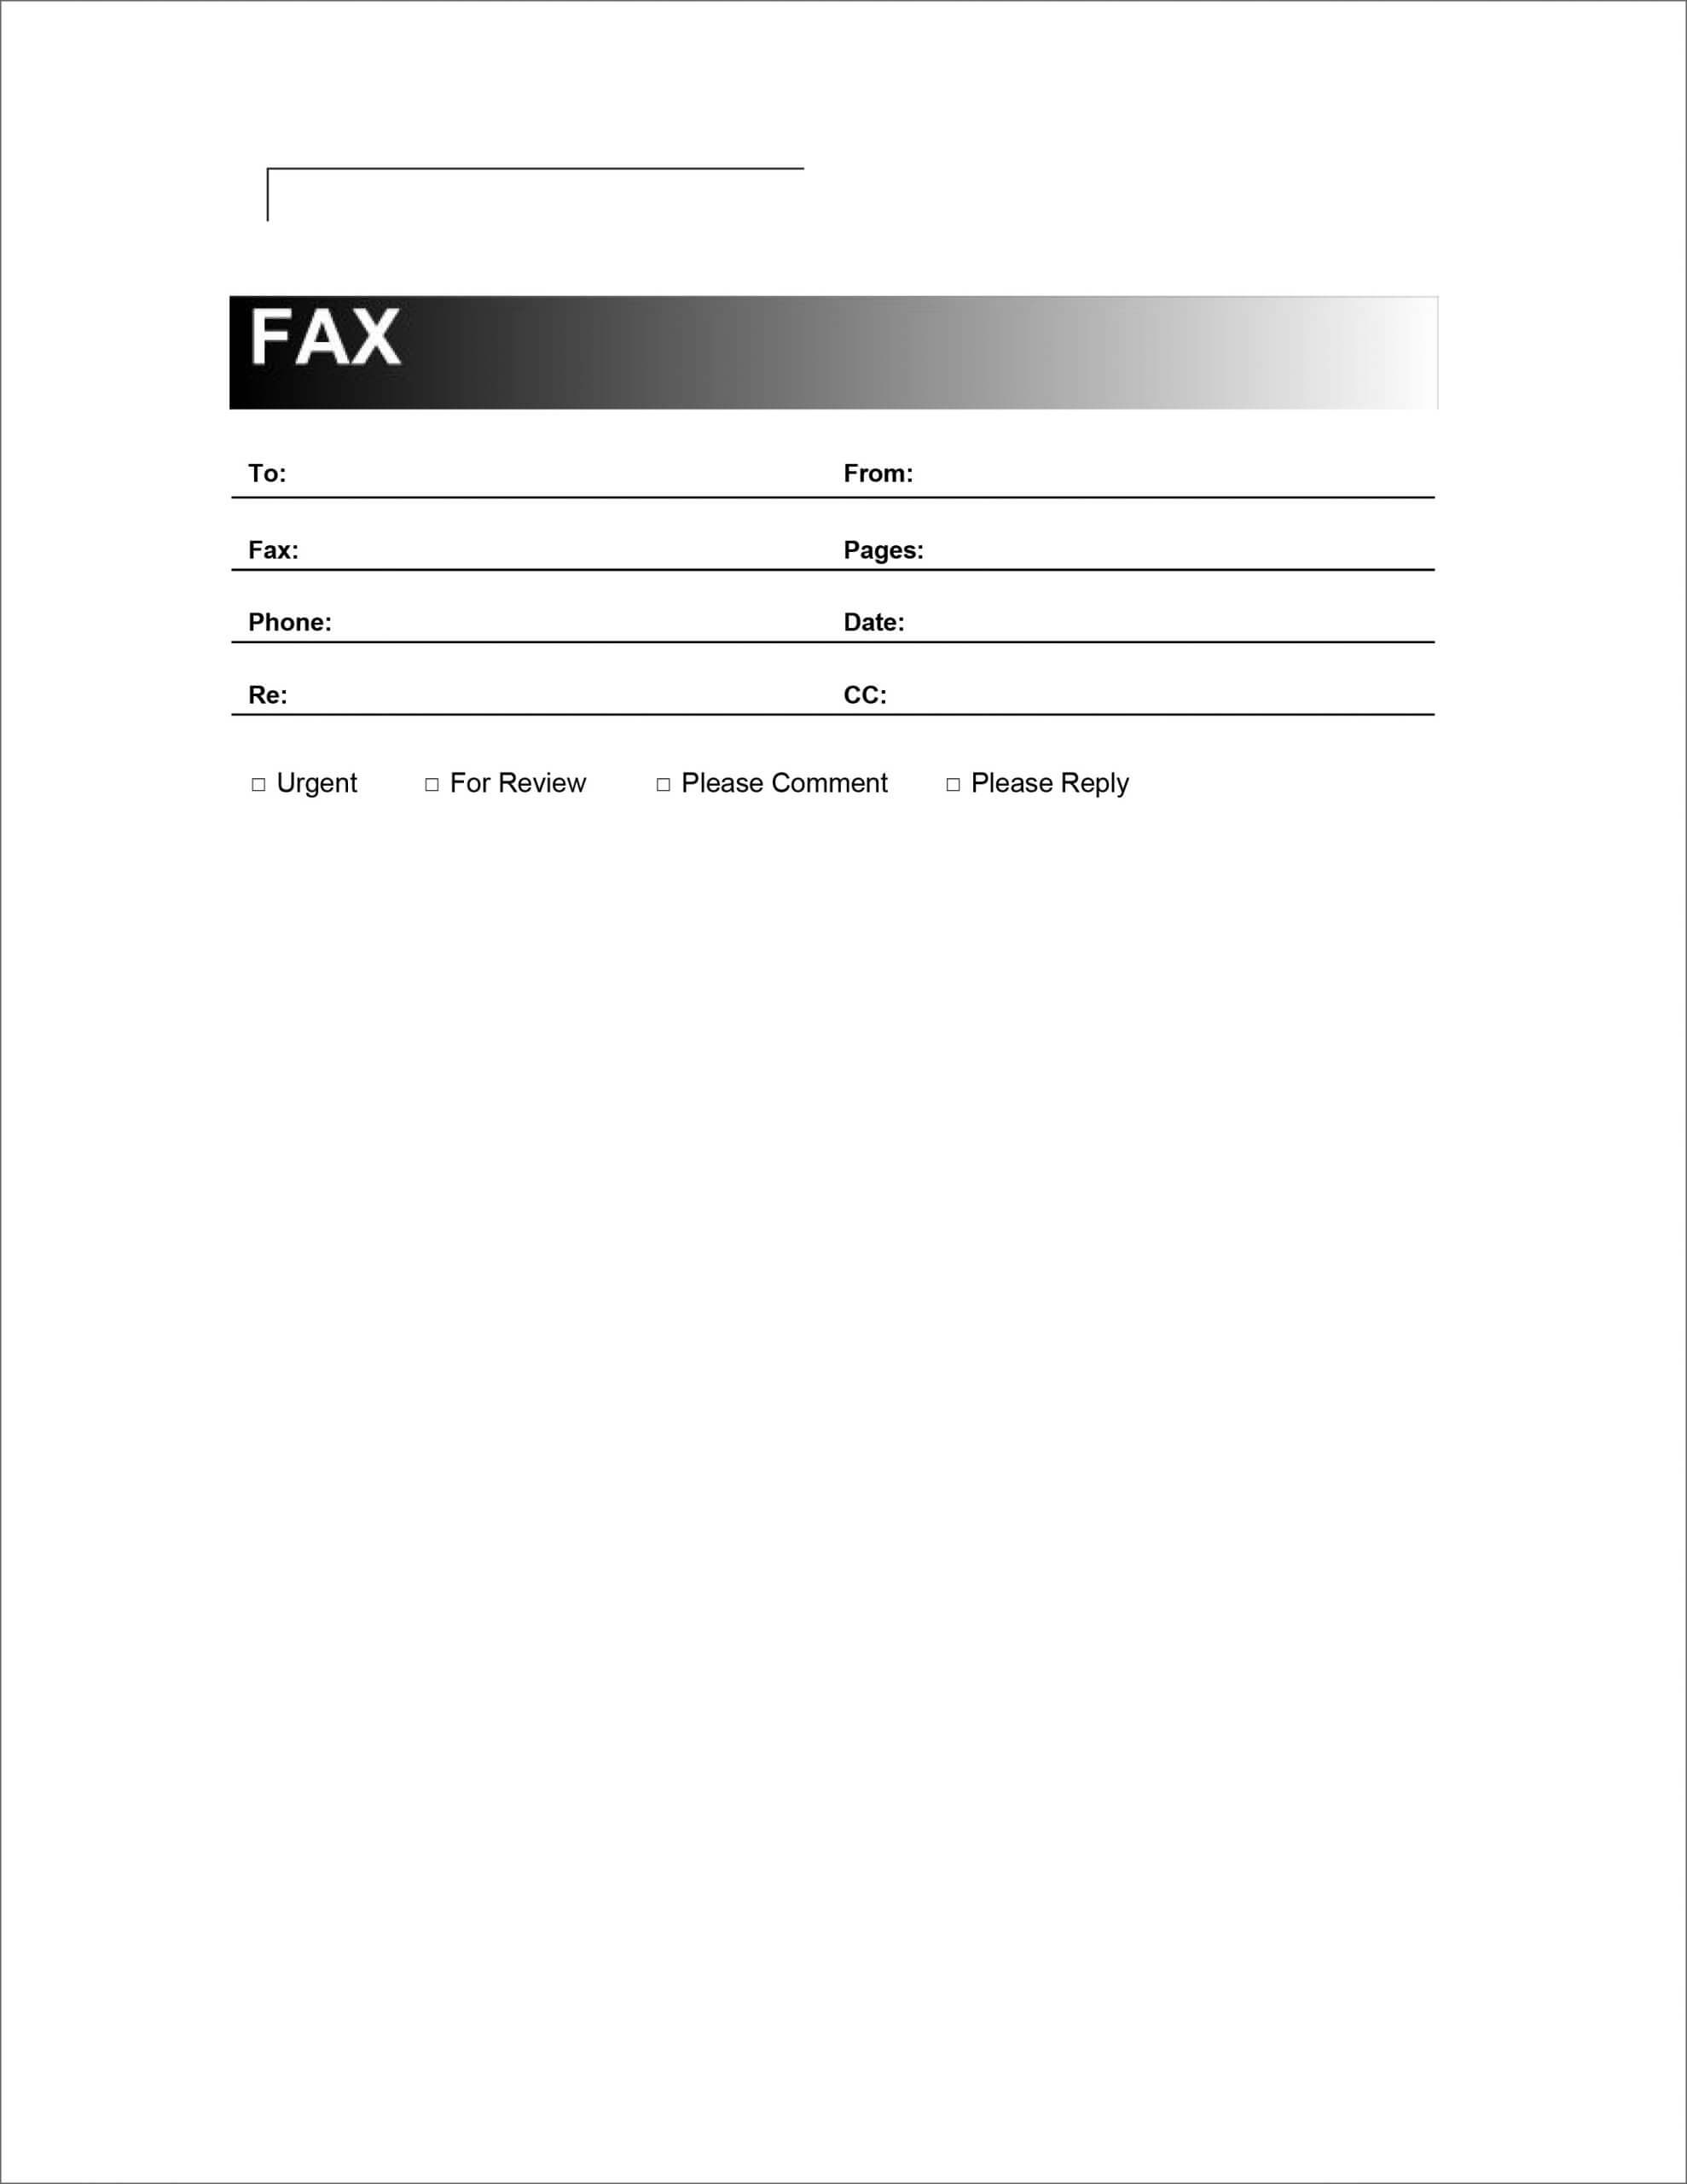 Basic Fax Cover Sheet Template Free Pdf Generic Printable Pertaining To Fax Cover Sheet Template Word 2010